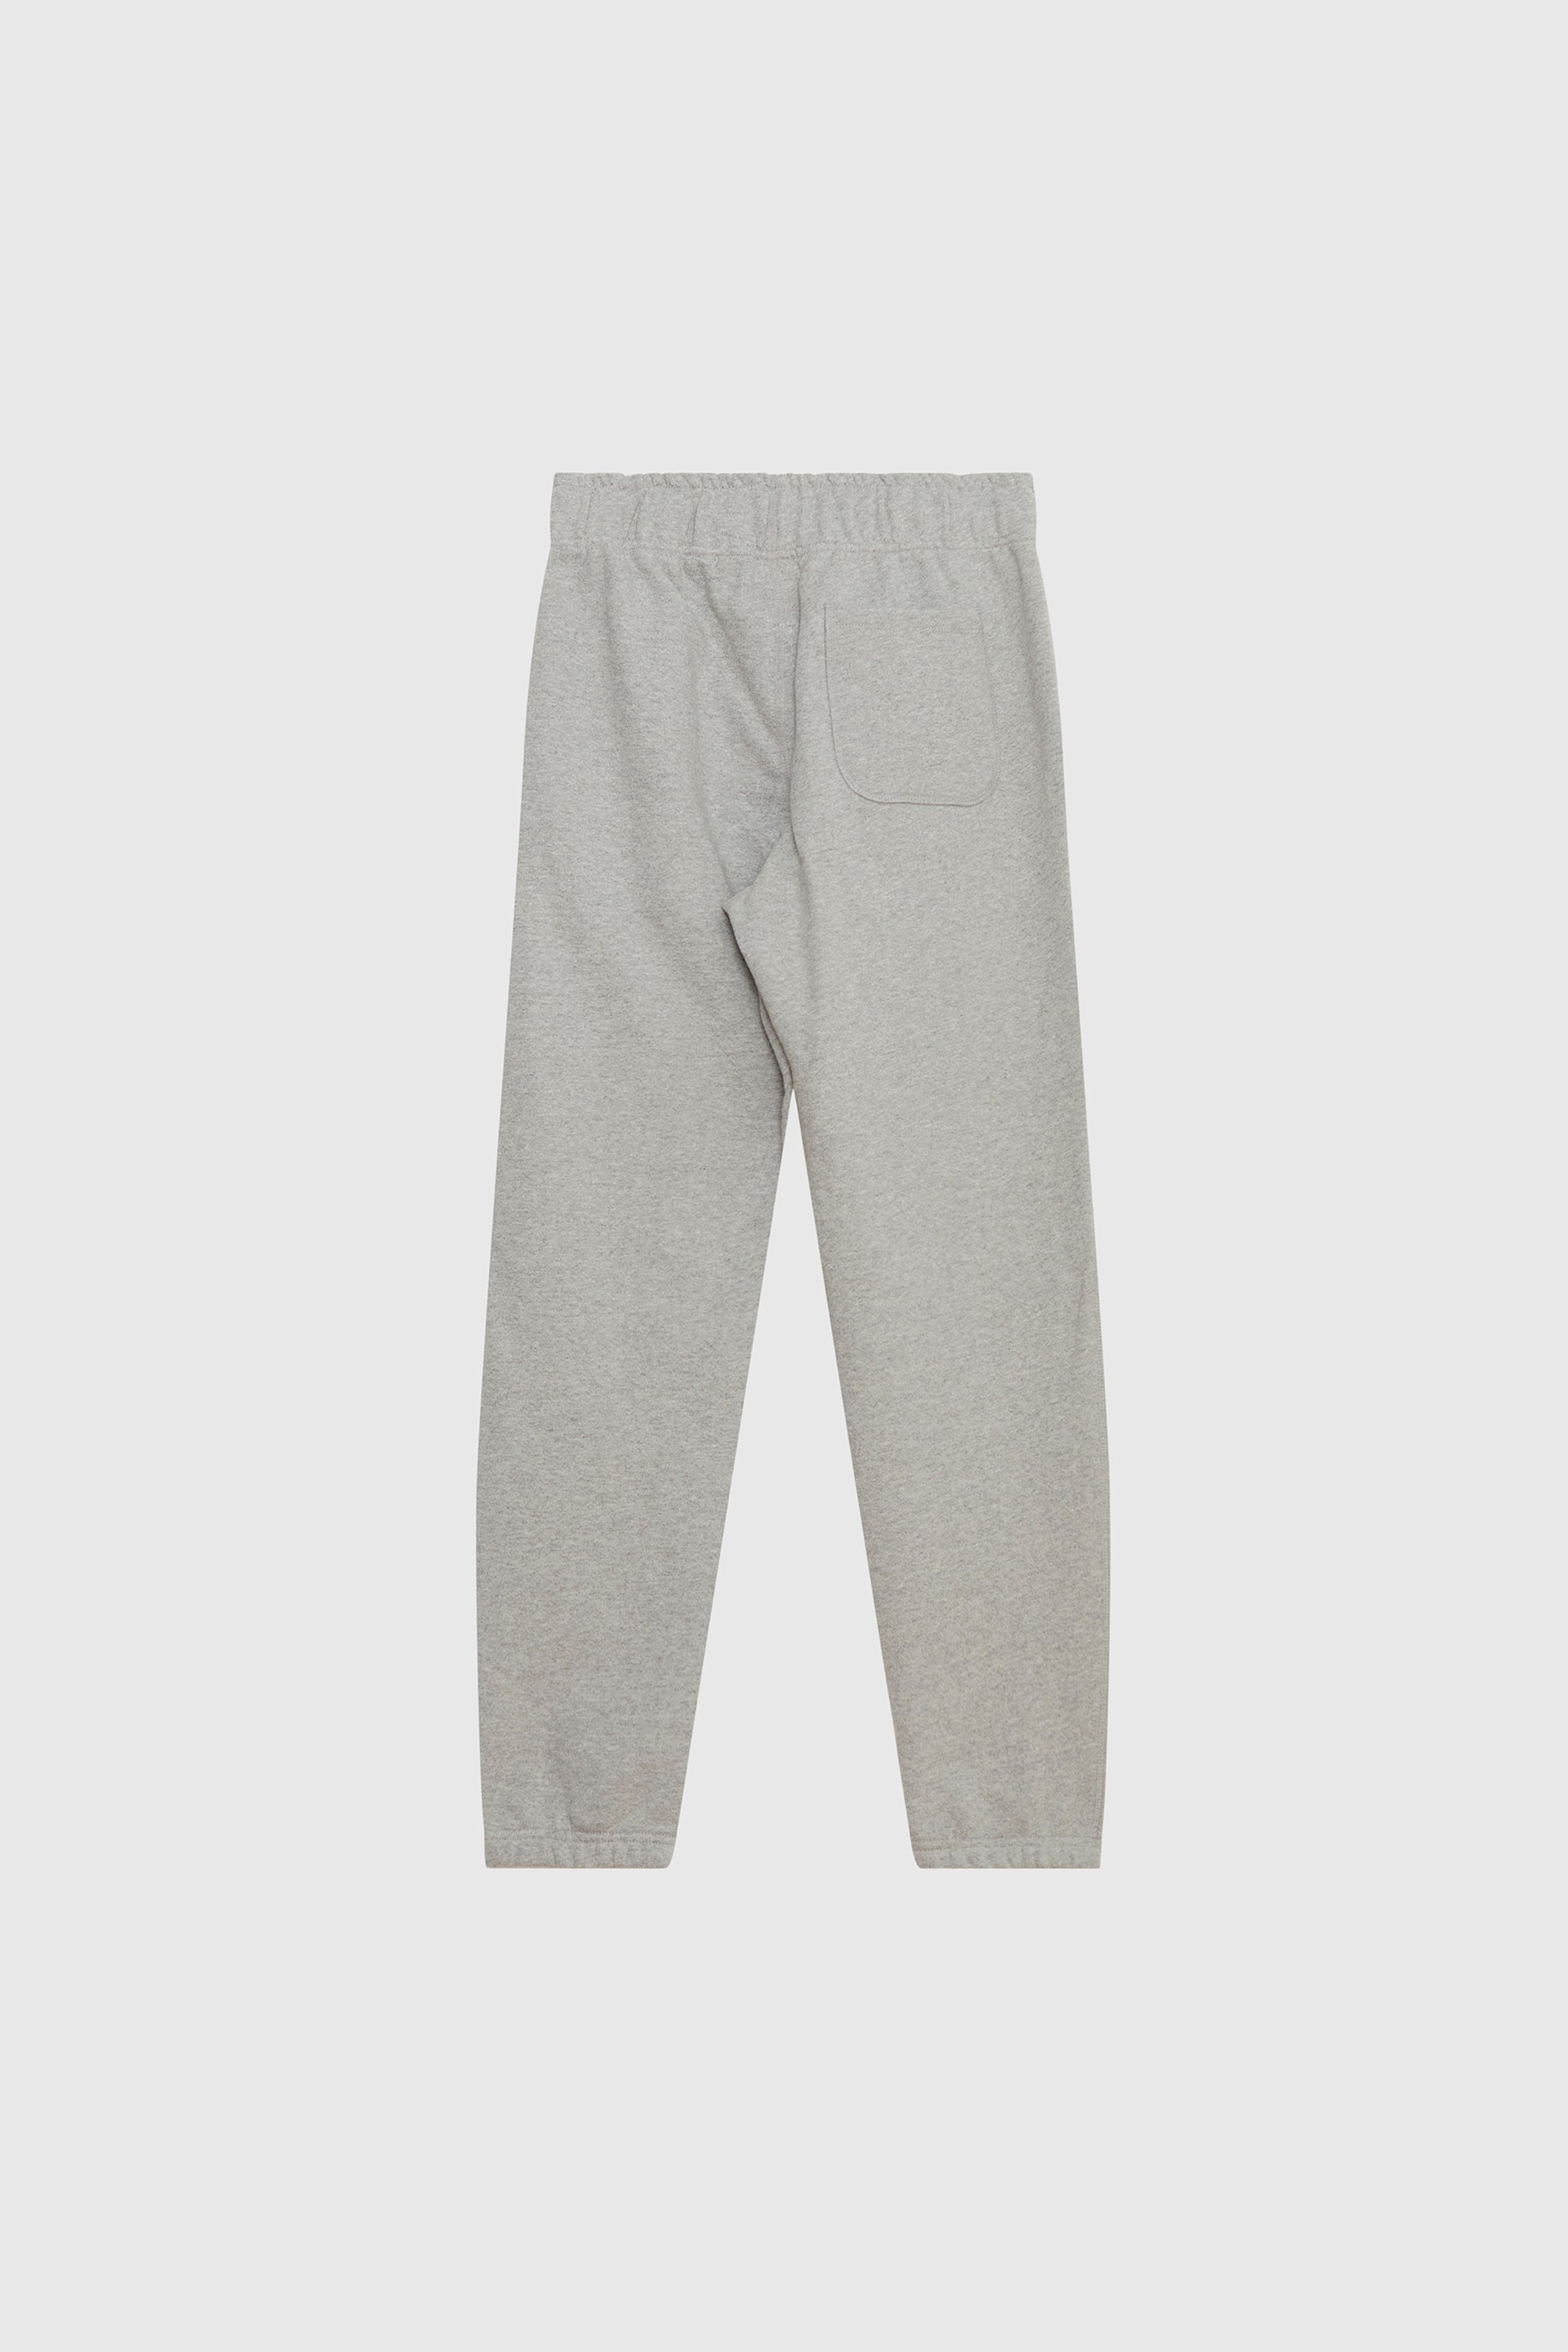 New Balance Made In USA Core Sweatpants Athletic grey | WoodWood.com